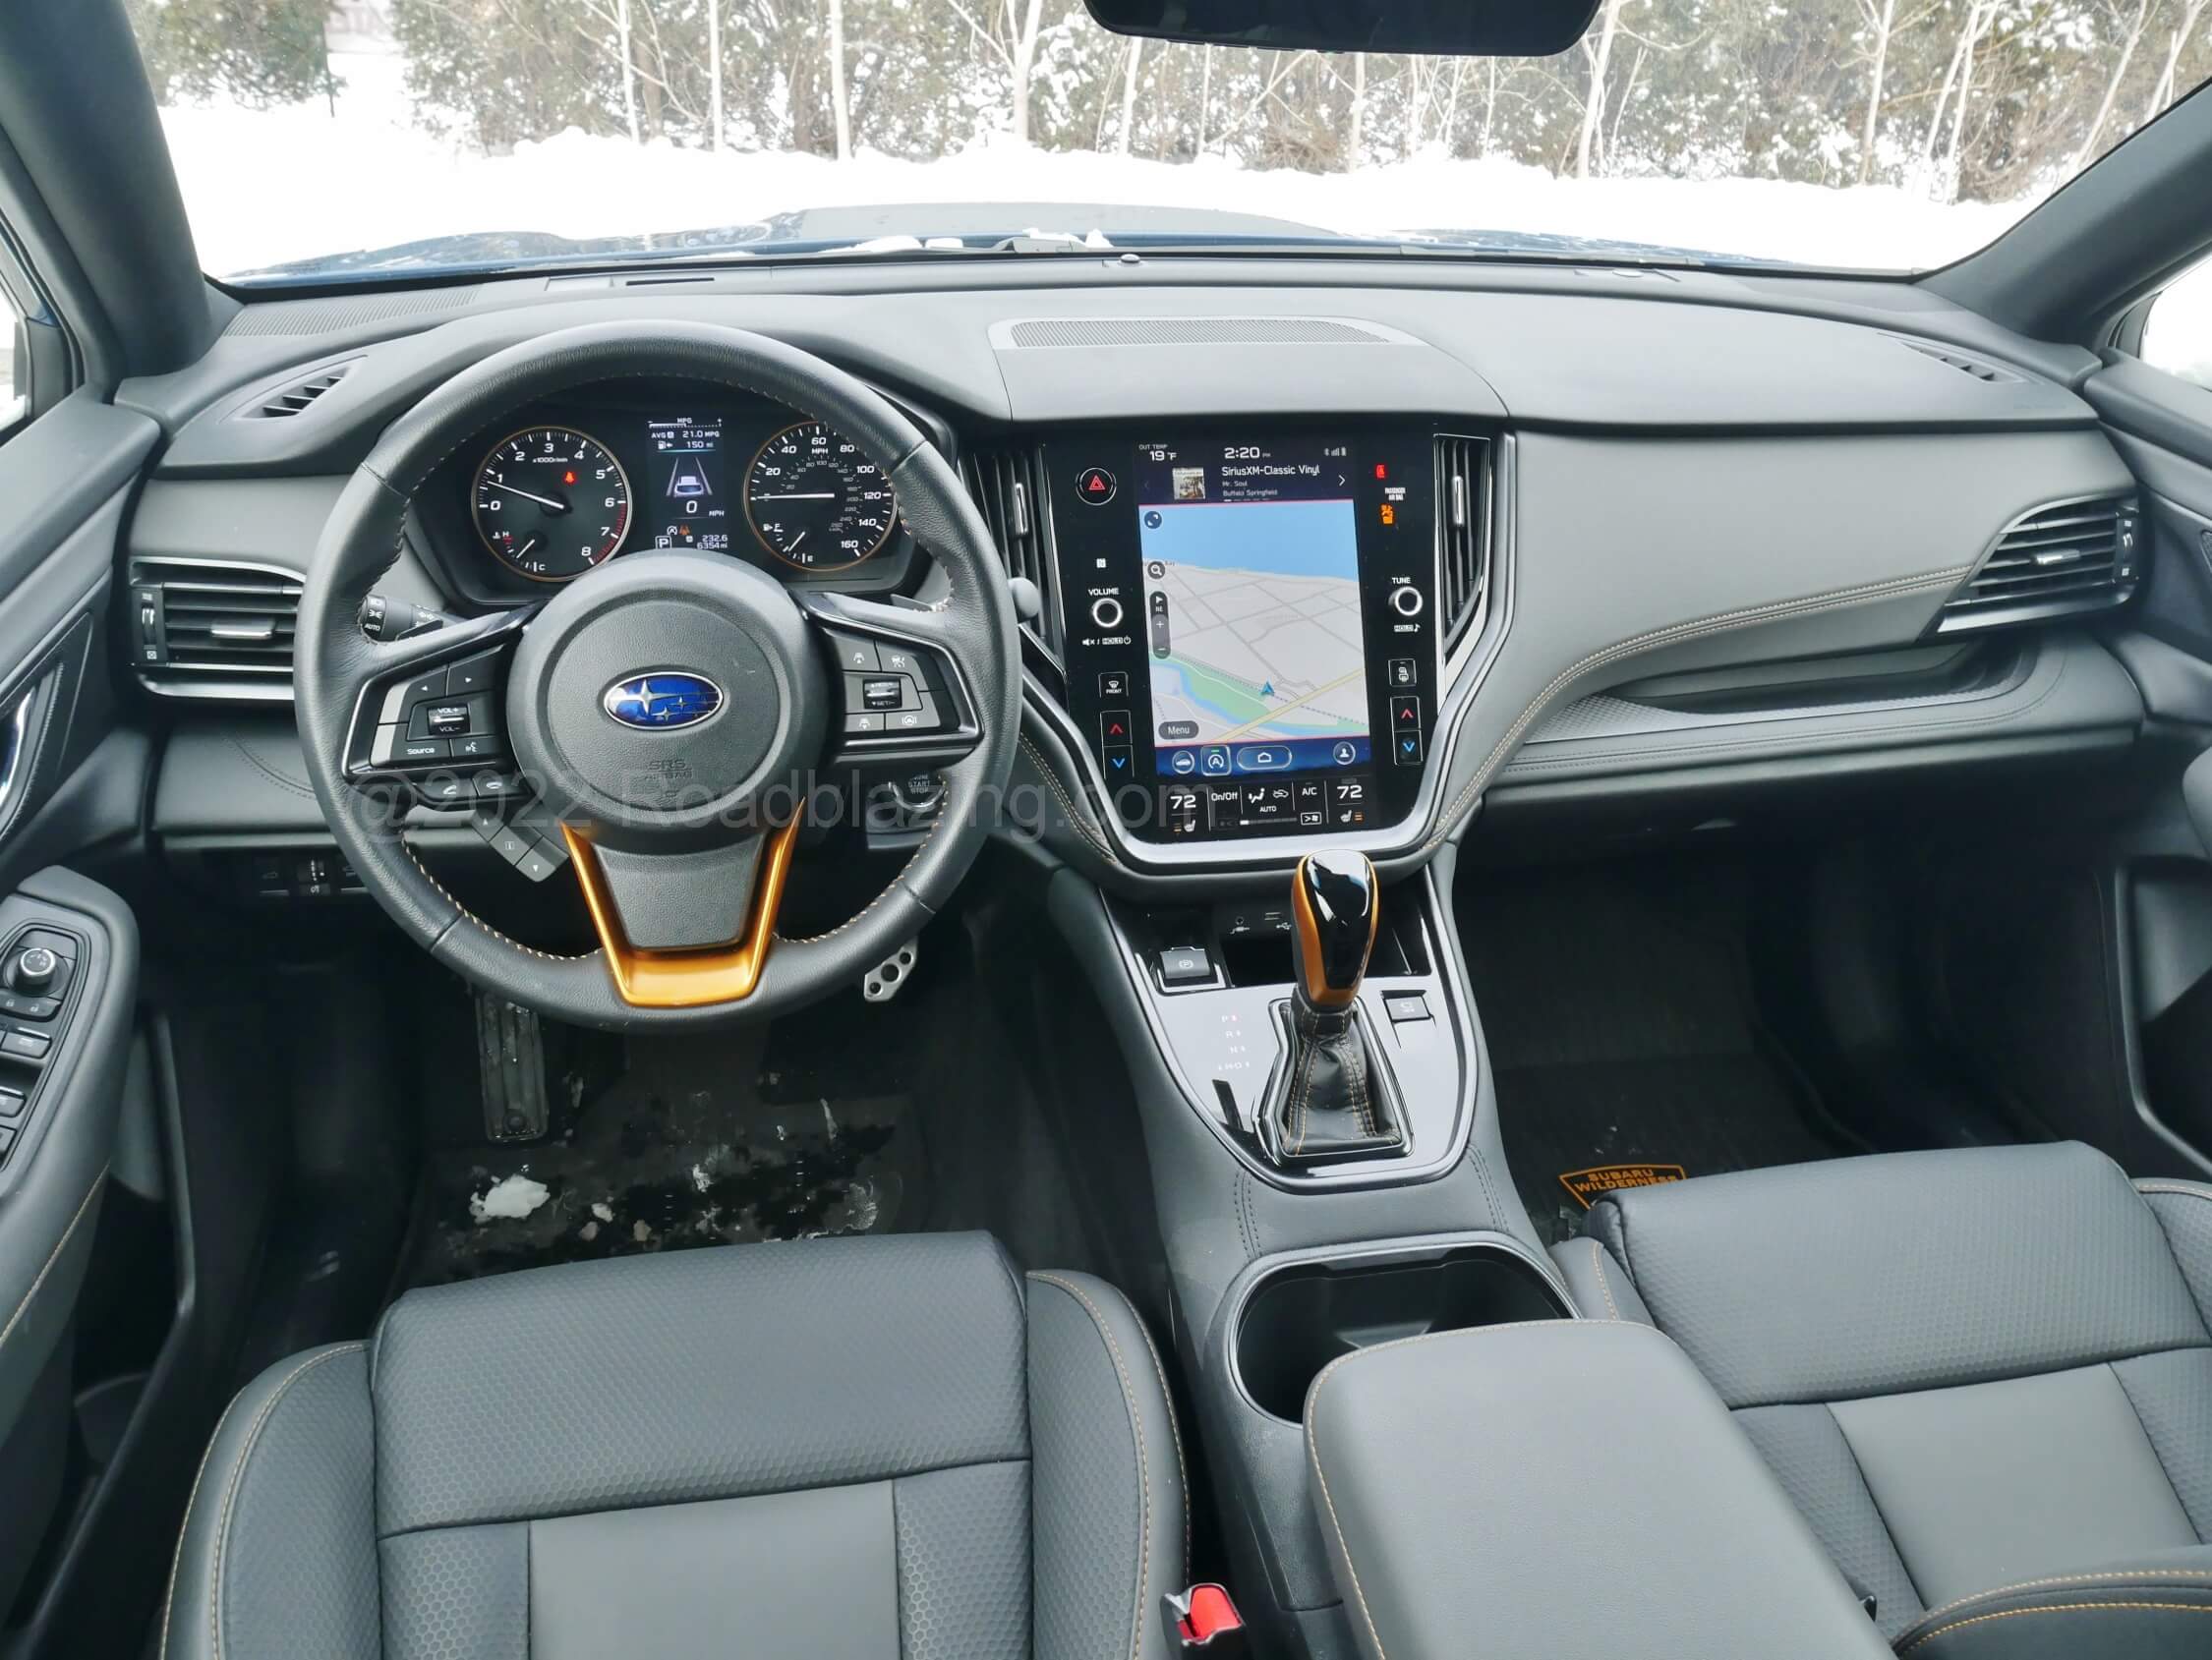 2022 Subaru Outback Wilderness: traditional analog instrumentation meets oversized 11.6" portrait touch LCD infotainment display